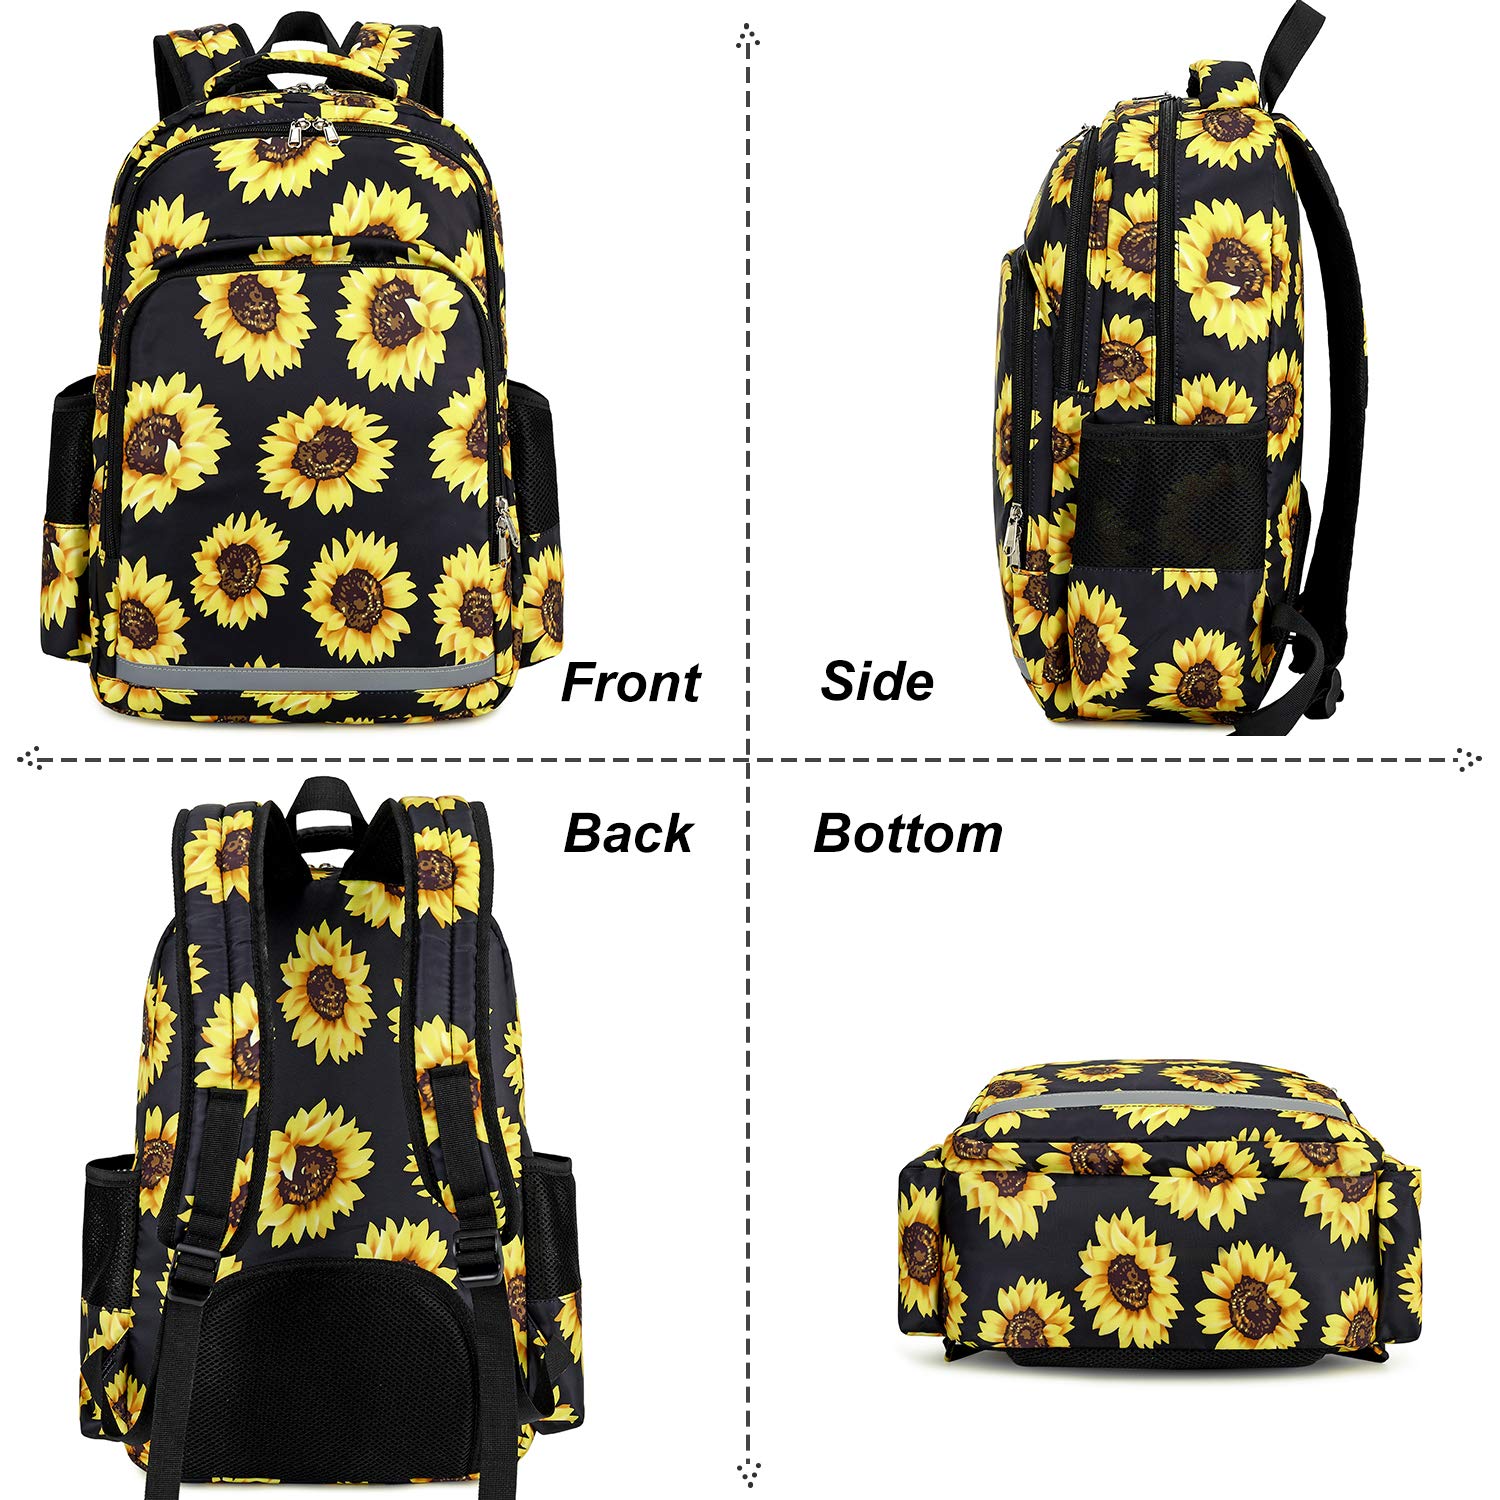 Sunflower Backpack Girls Floral School Bookbag Cute 3 in 1 Backpack Set with Insulated Lunch Box and Pencil Case (Sunflower 3 Pieces - Black)